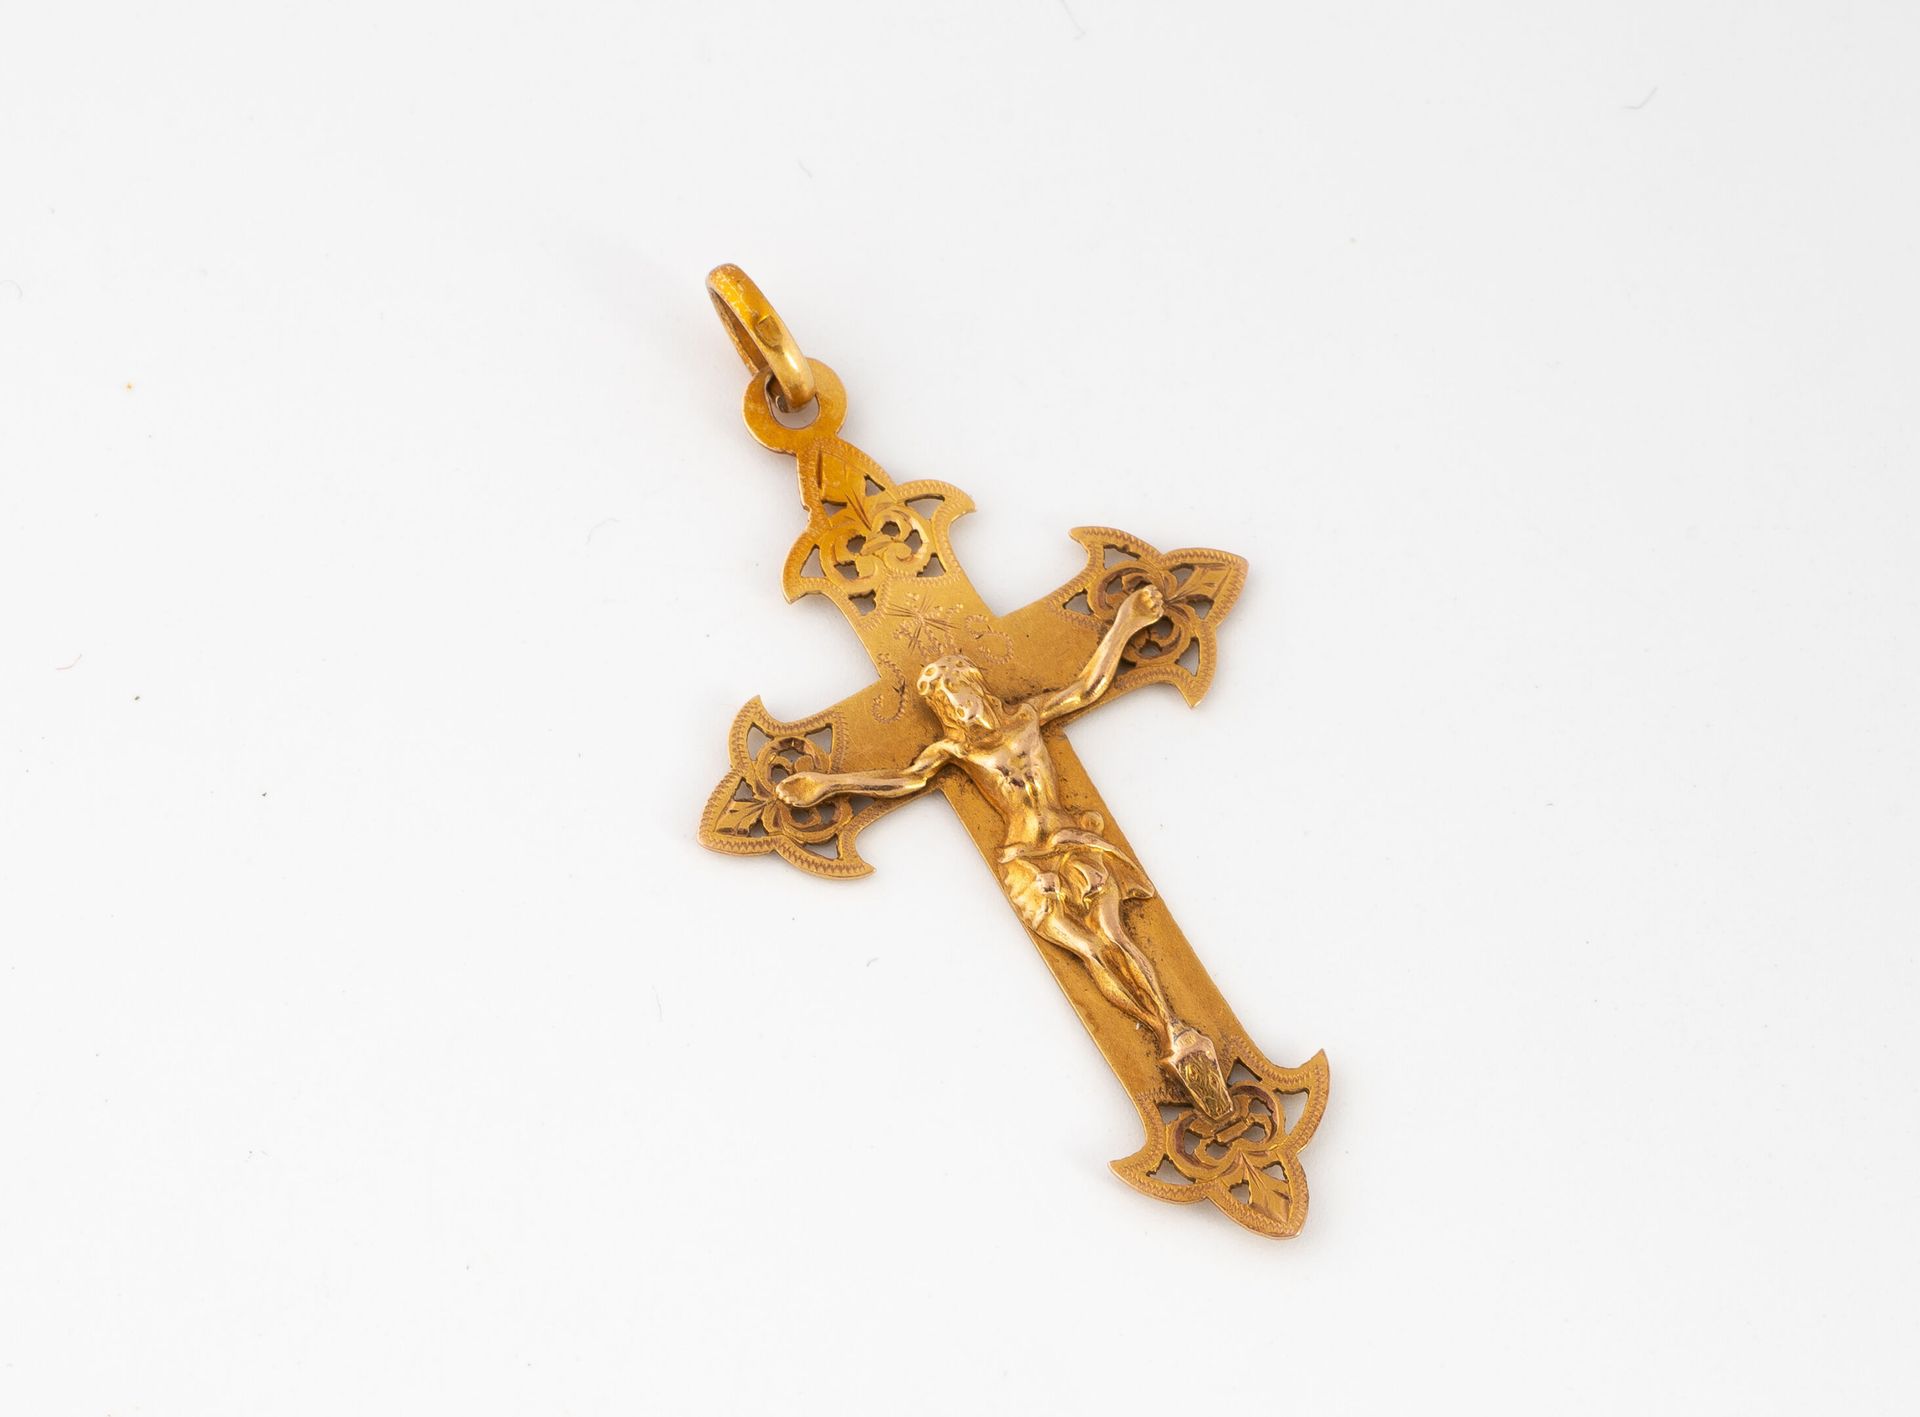 Null Pendant cross yellow gold (750).
Weight : 3,0 g. - H. 4,5 cm approx.
Scratc&hellip;